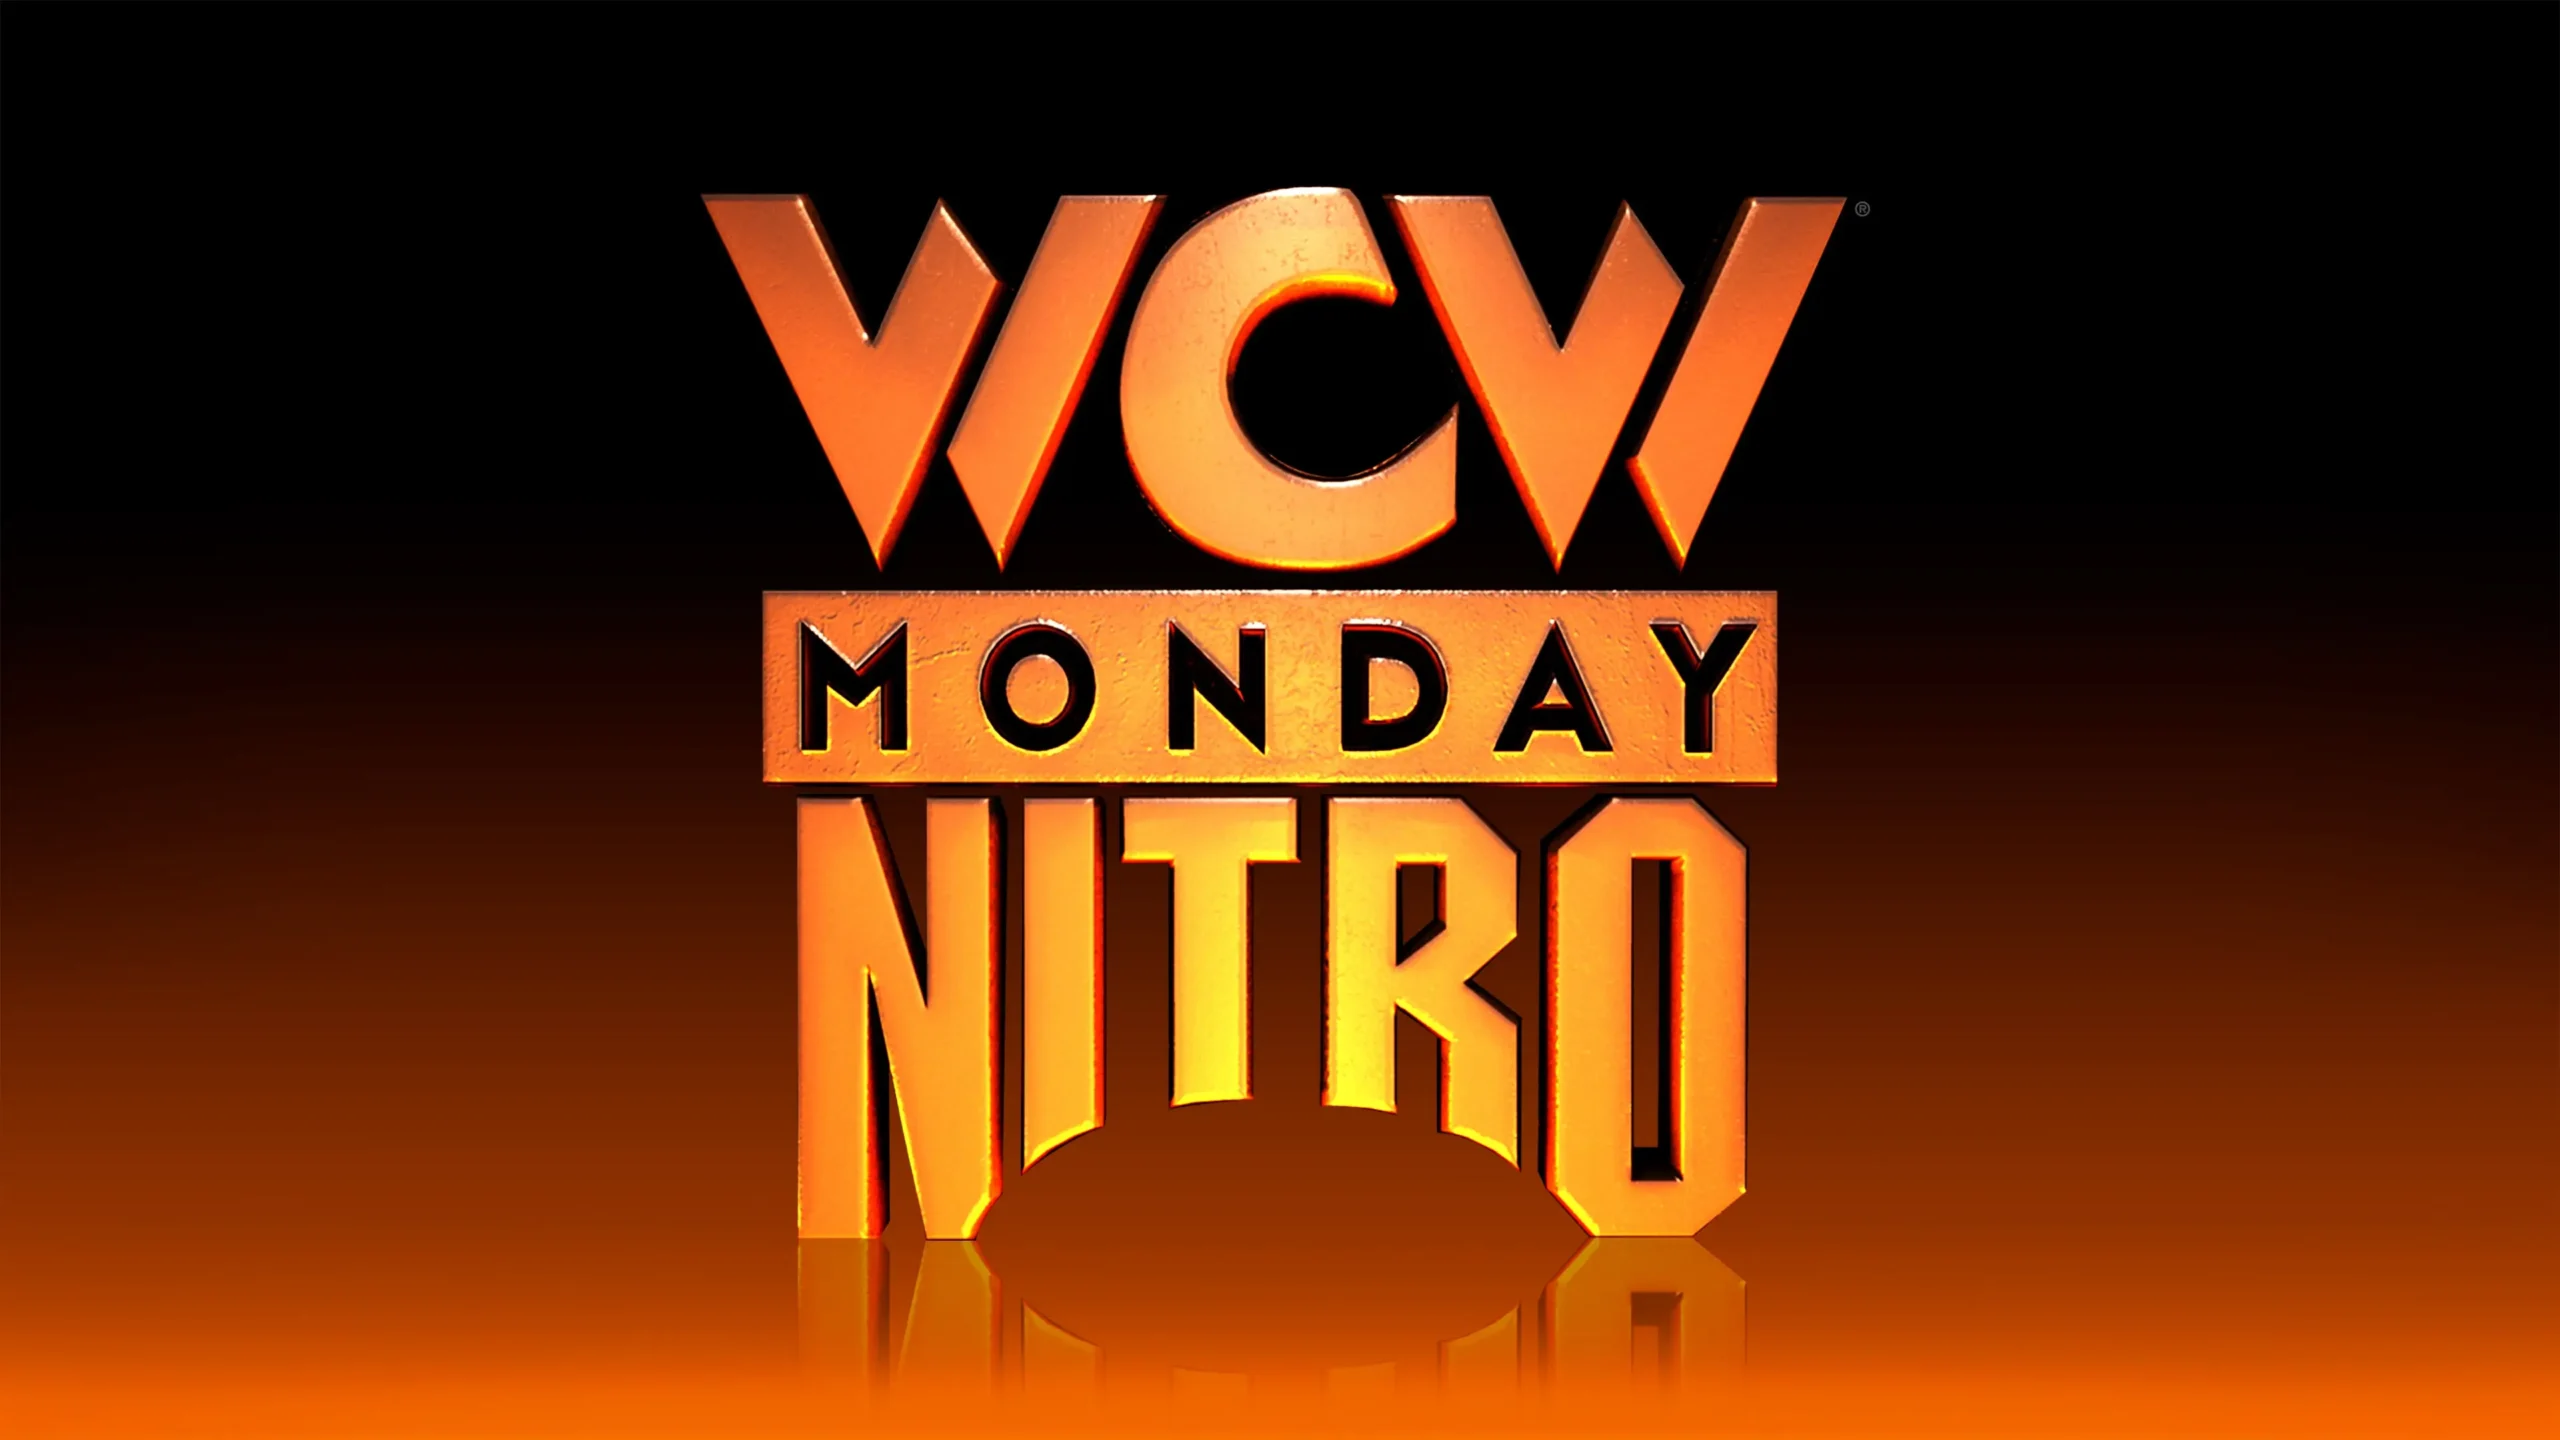 The inaugural complete episode of “Who Killed WCW” has been launched by VICE TV.